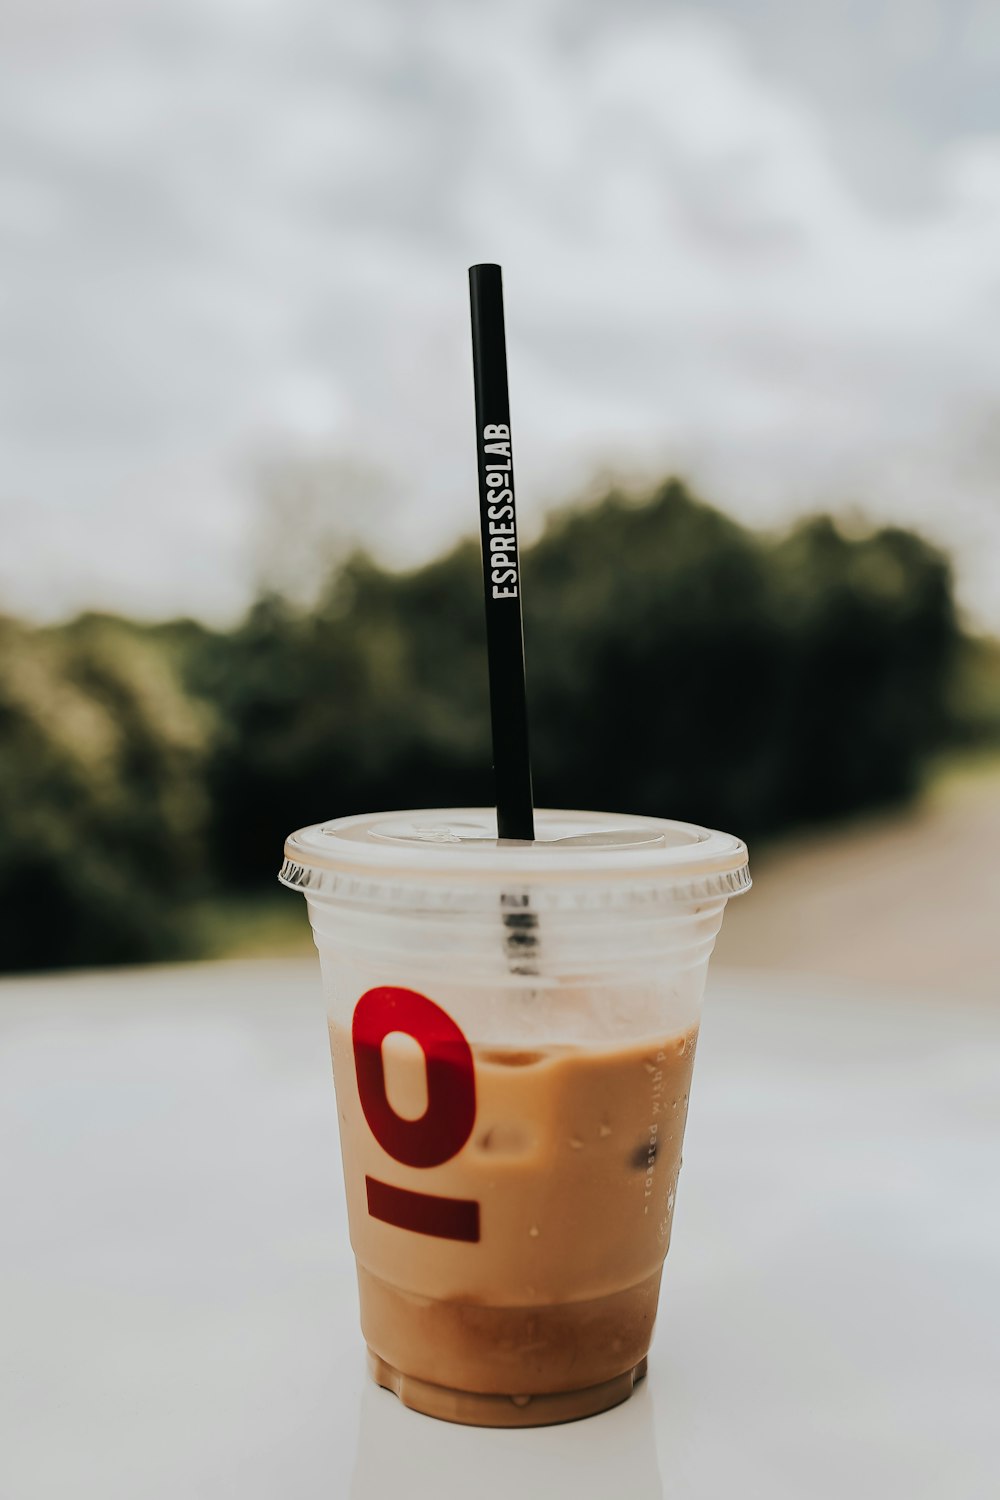 dunkin donuts disposable cup with black straw